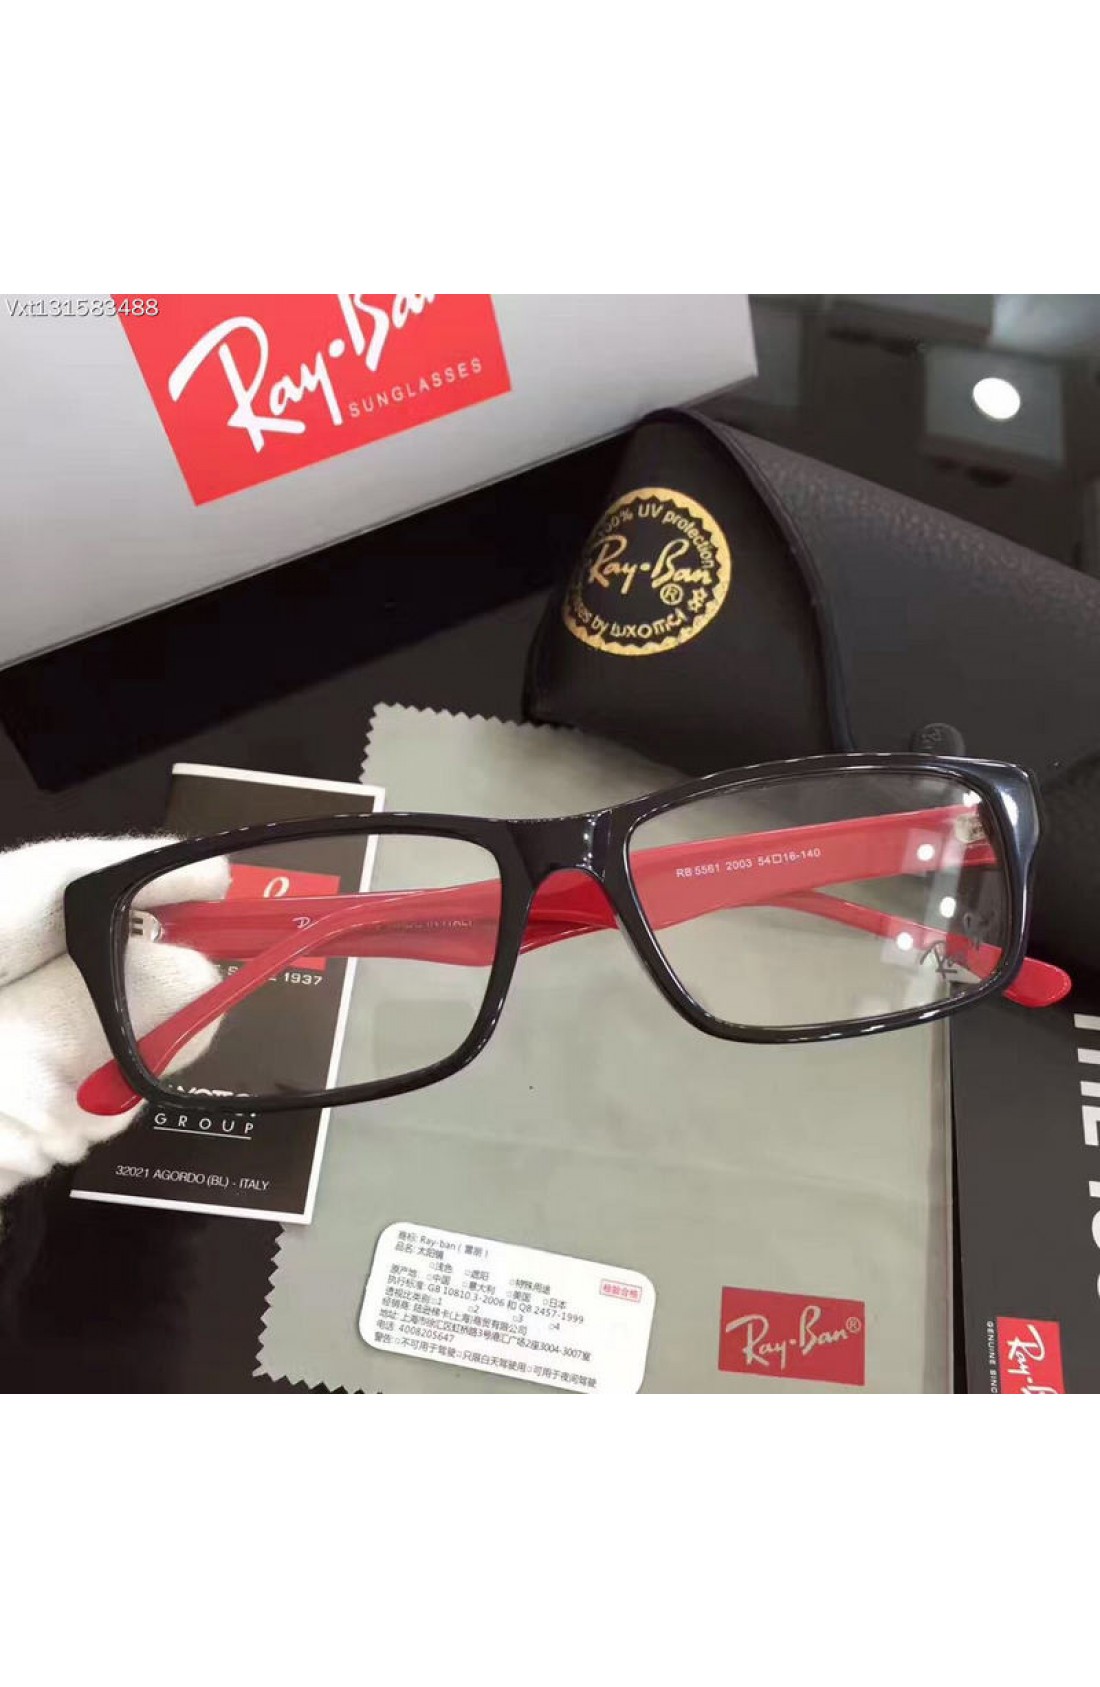 ray ban red and black sunglasses